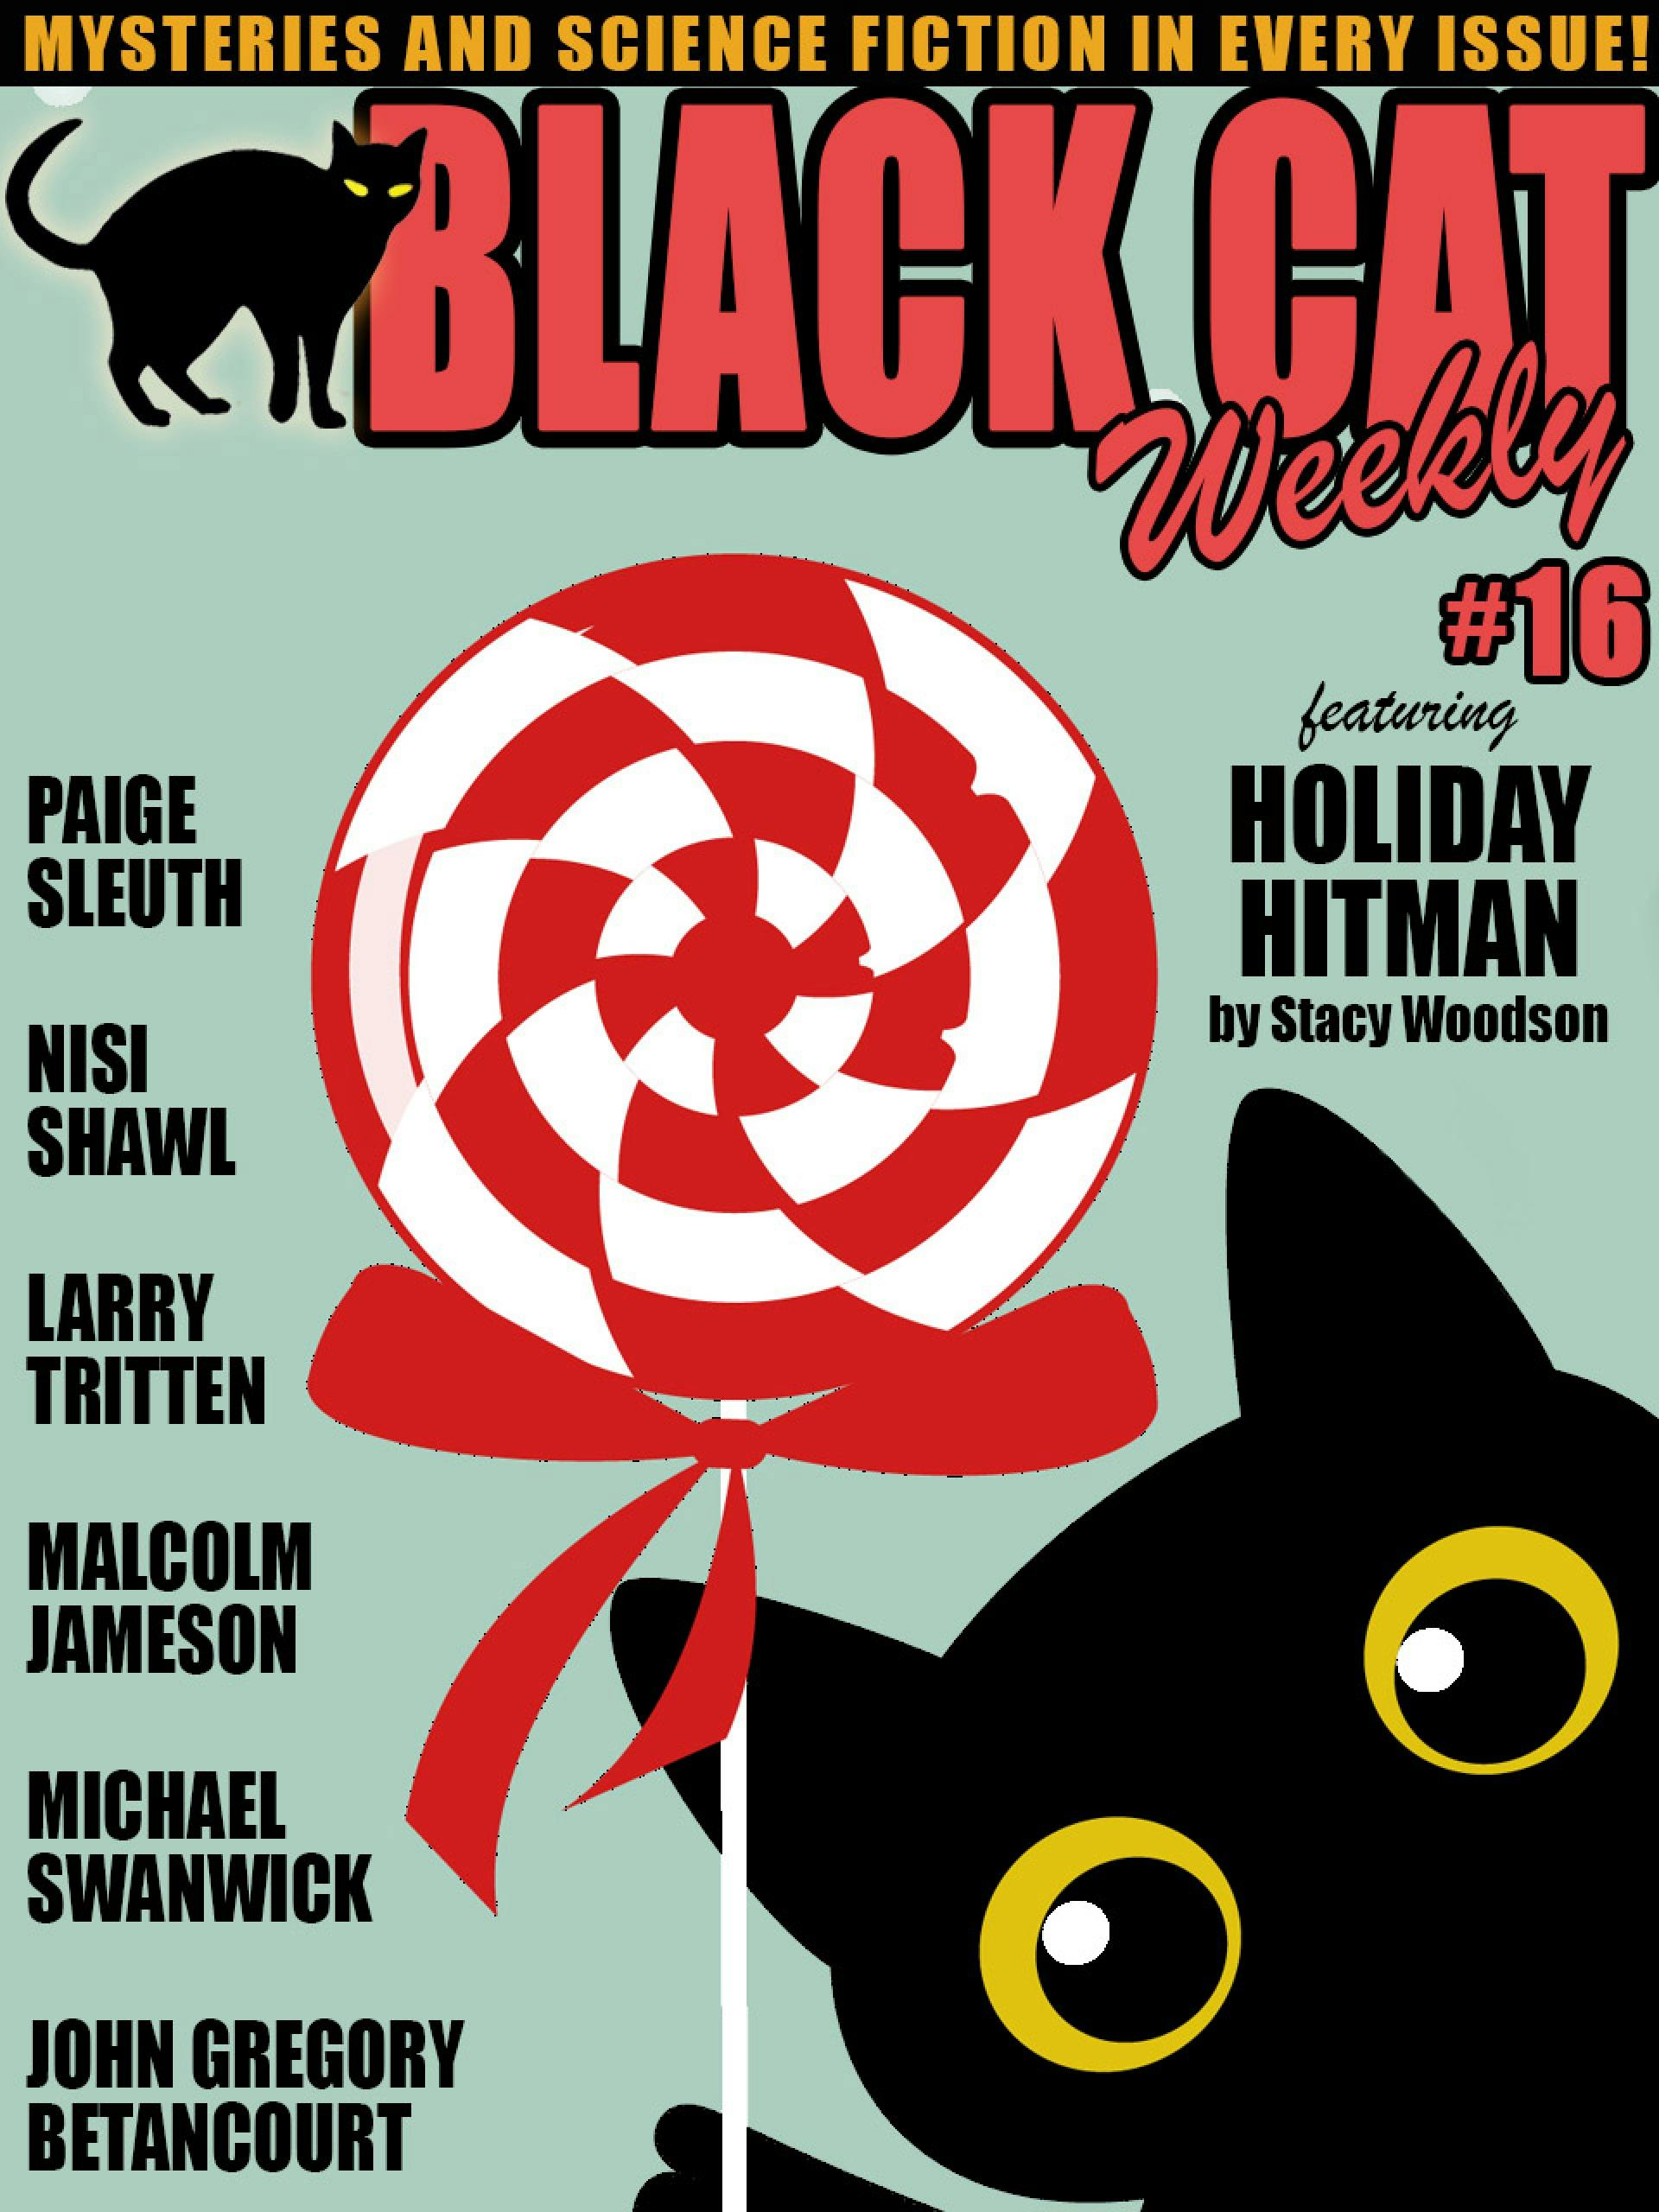 Black Cat Weekly #16 - undefined